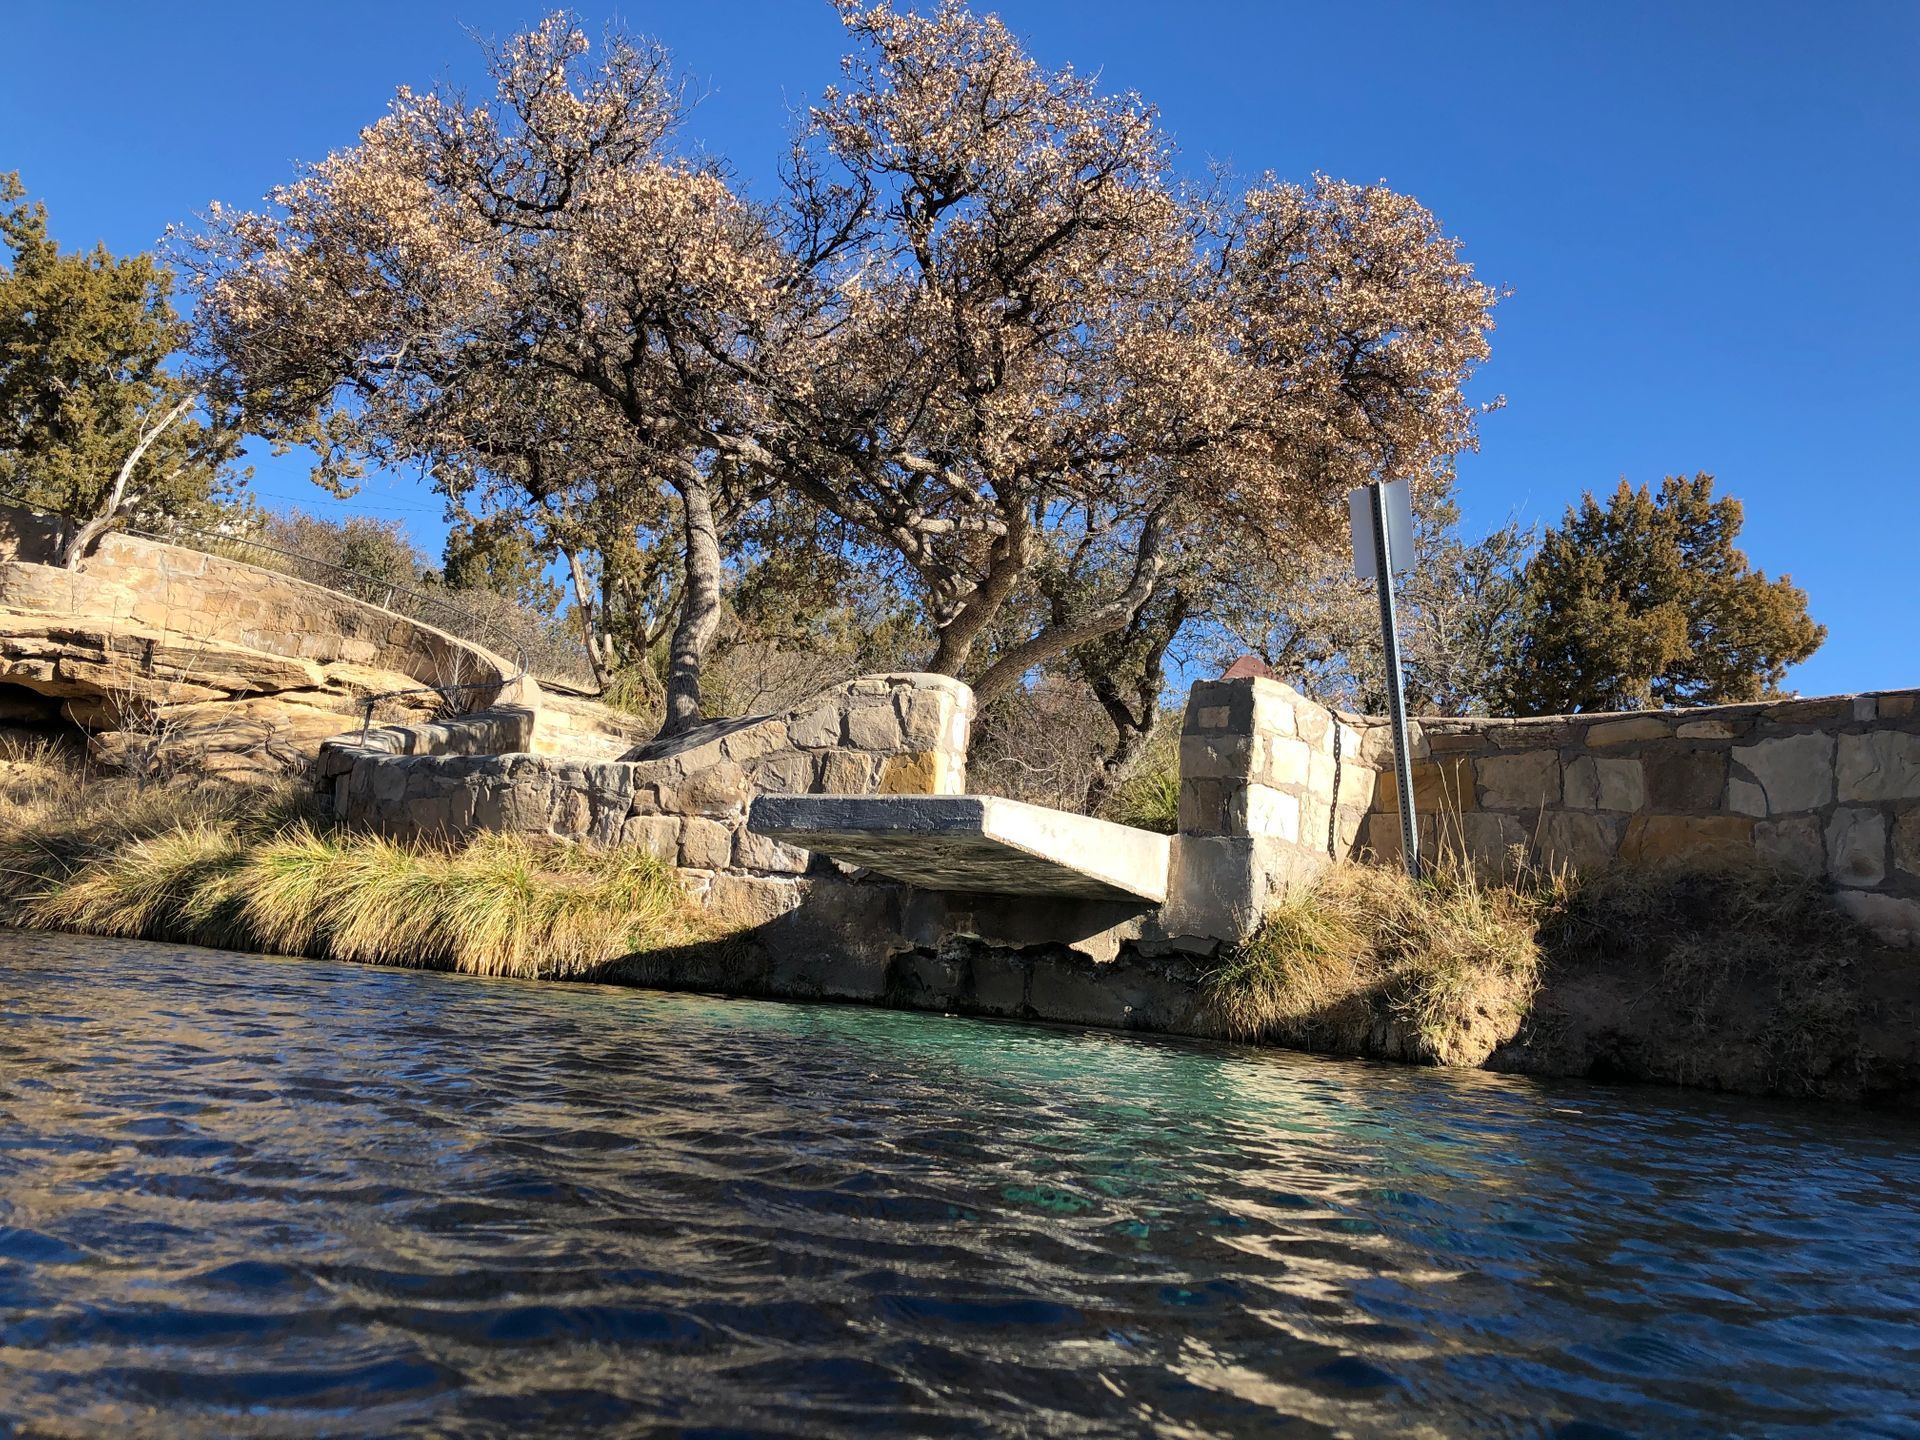 Swimming the Blue Hole in Santa Rosa, NM